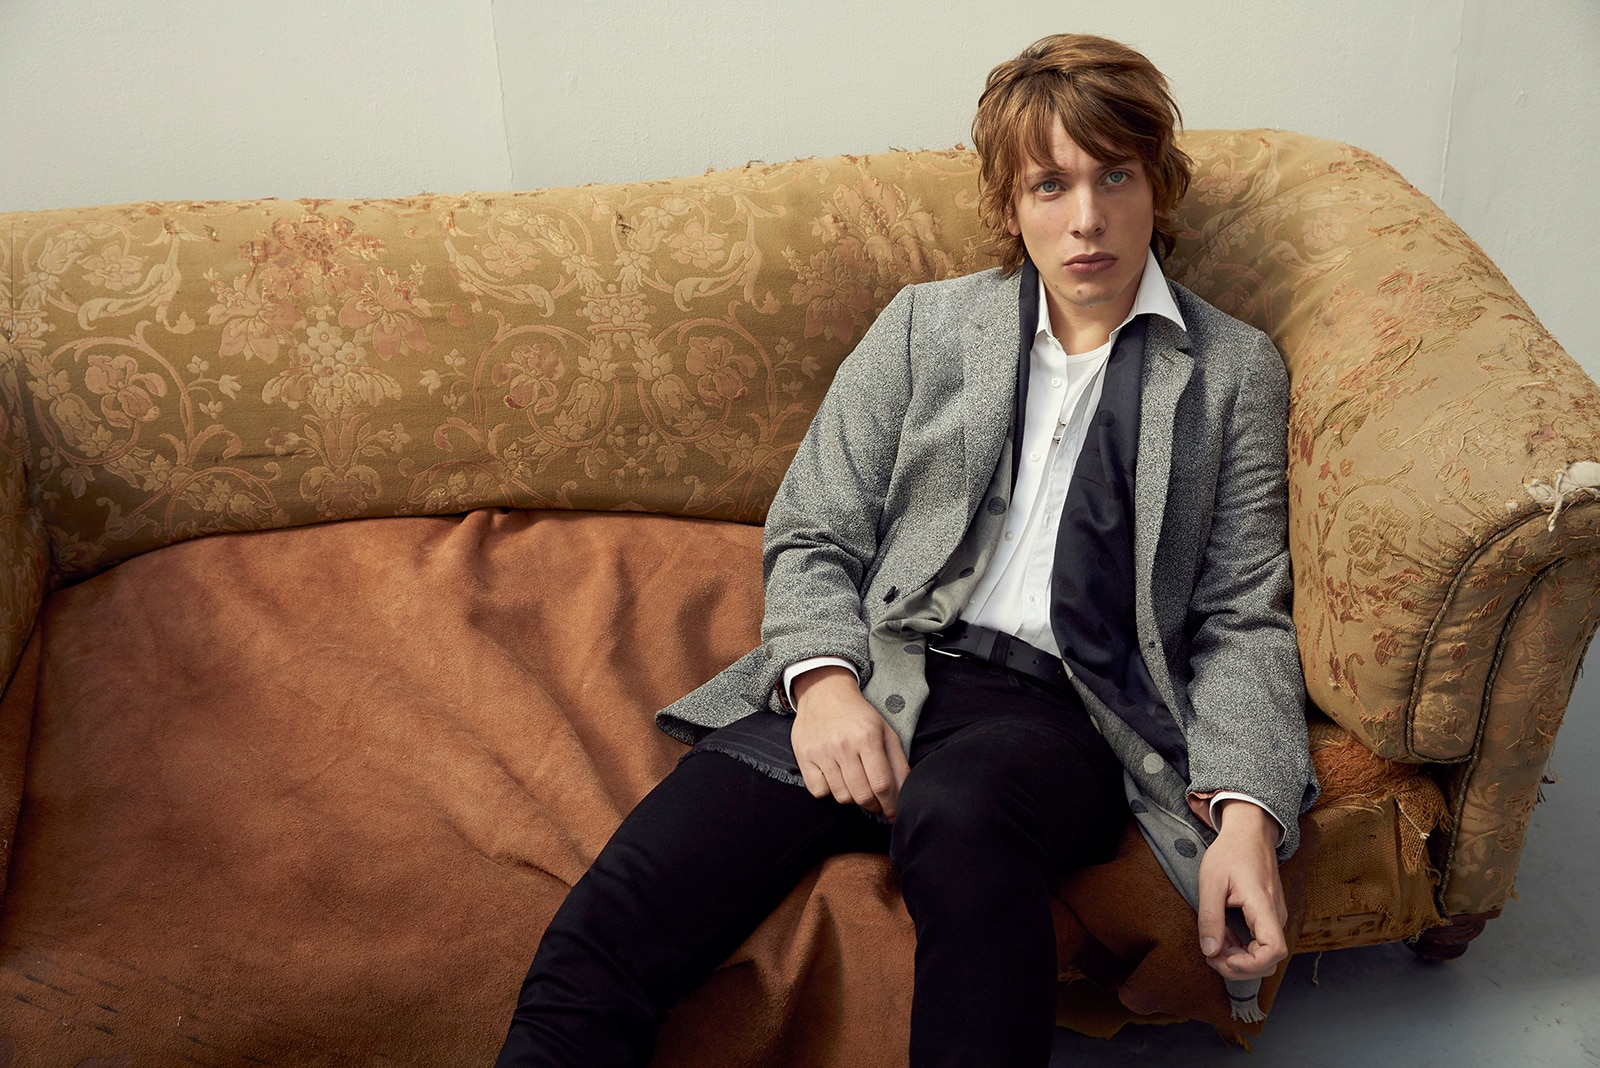 Paul Smith's Exclusive Capsule | The Journal | MR PORTER